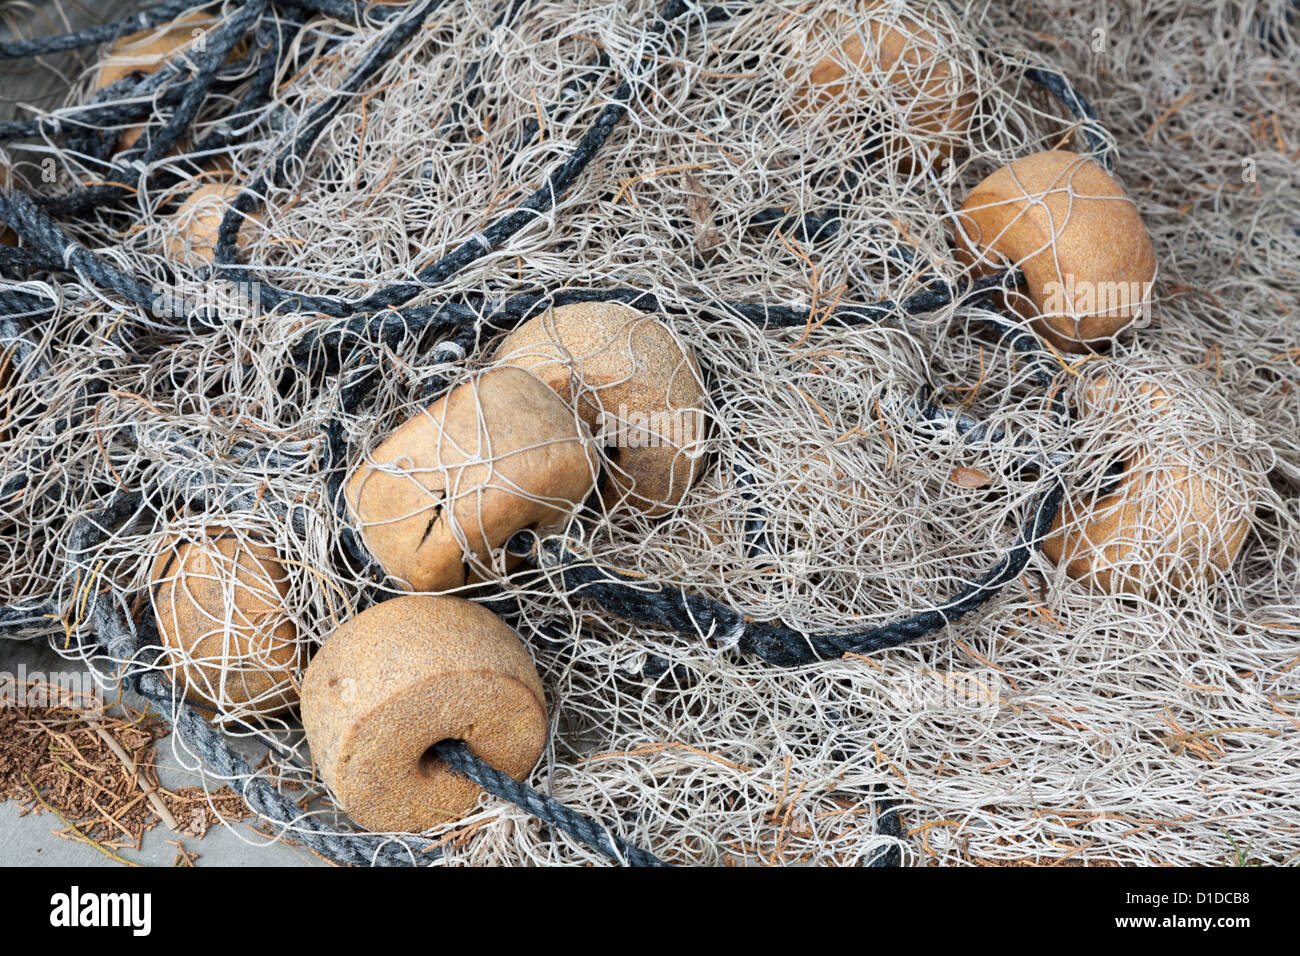 Close-up of fishing net with floats Stock Photo